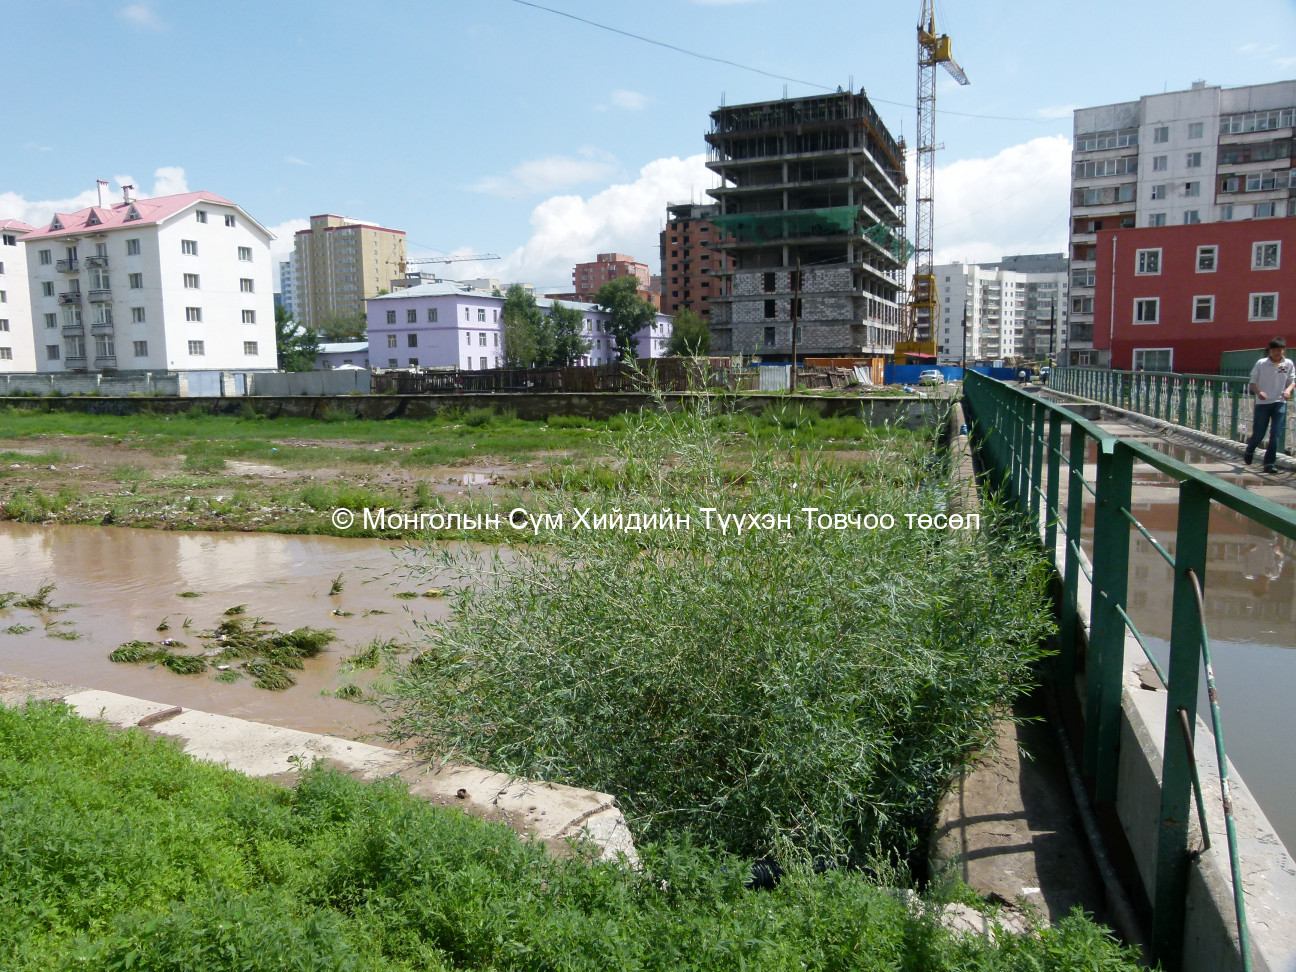 East bank of East-Selbe River 2007